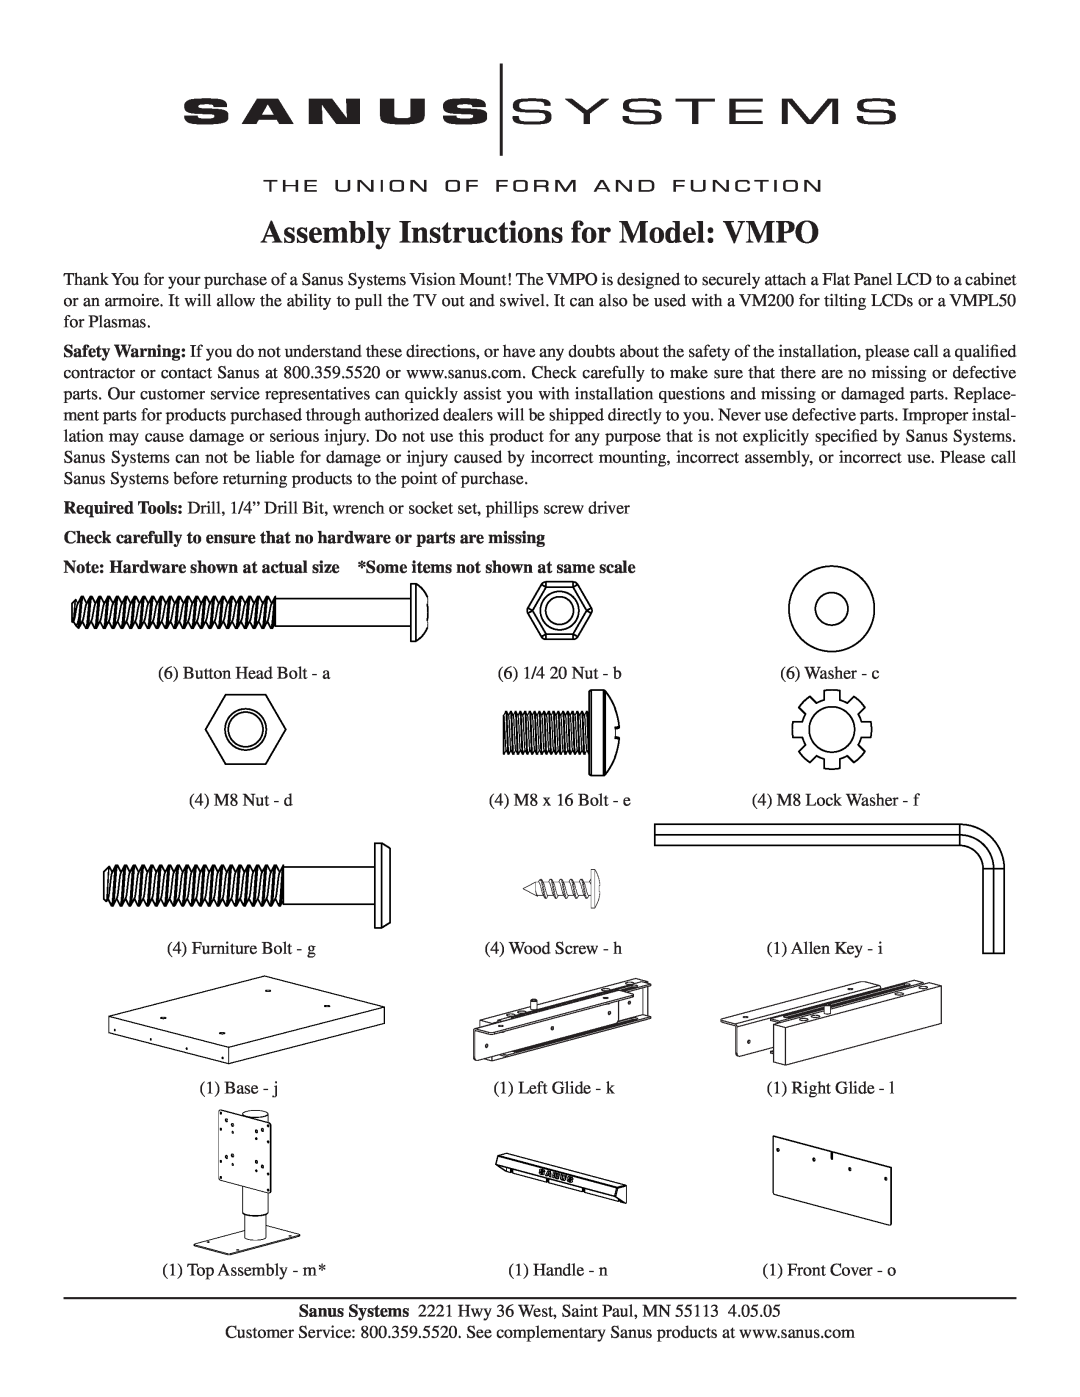 Sanus Systems manual Assembly Instructions for Model VMPO 